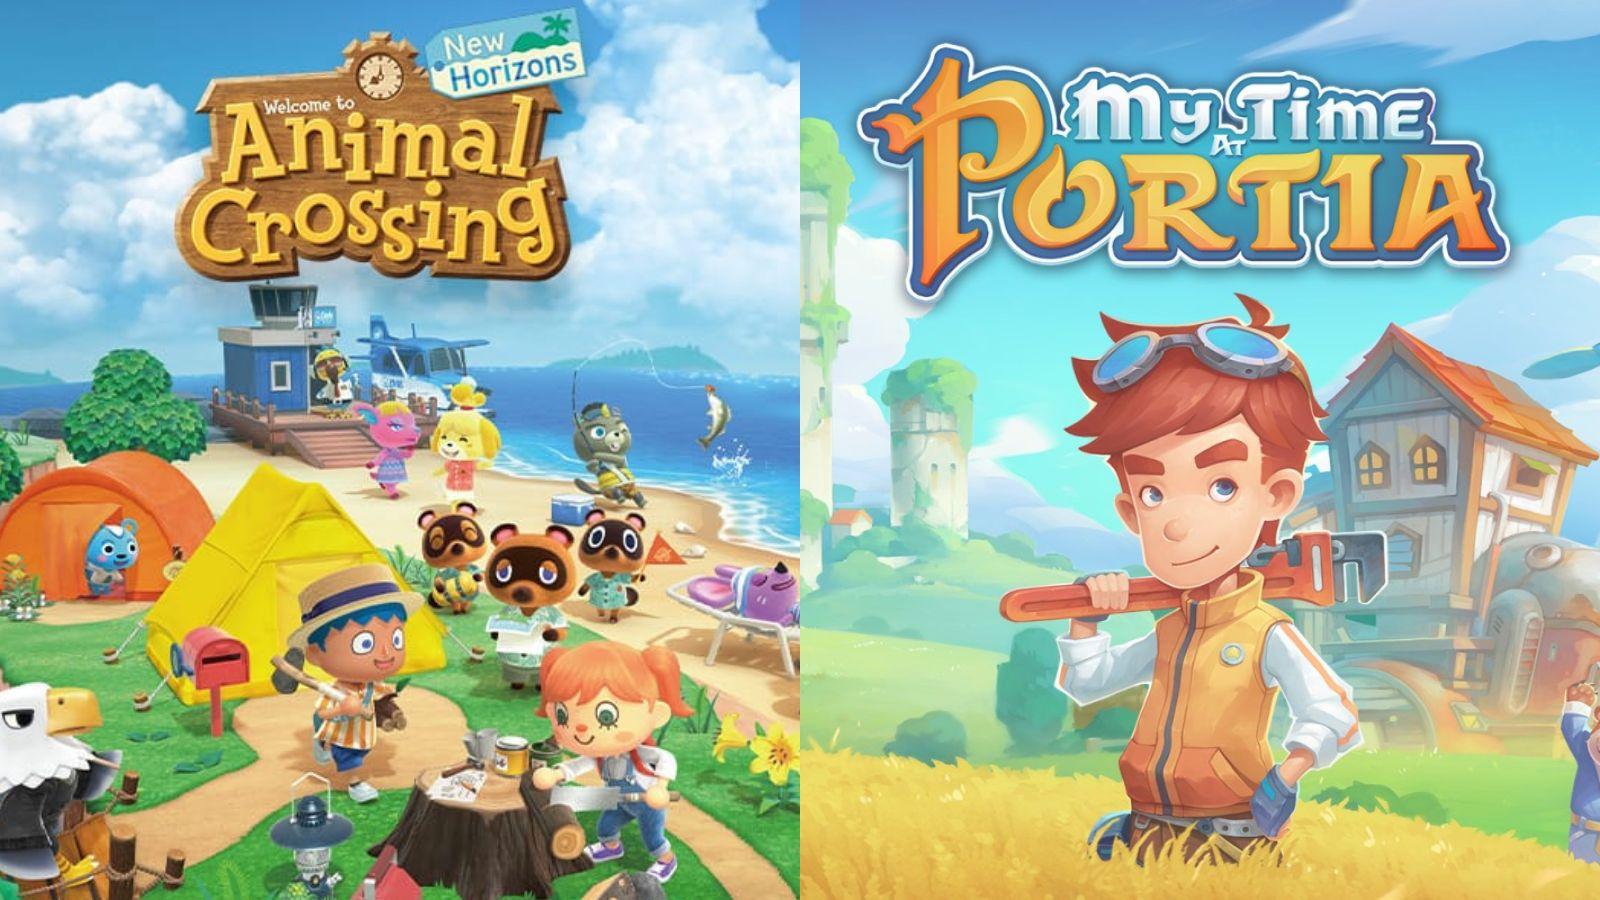 Animal crossing and My time at portia